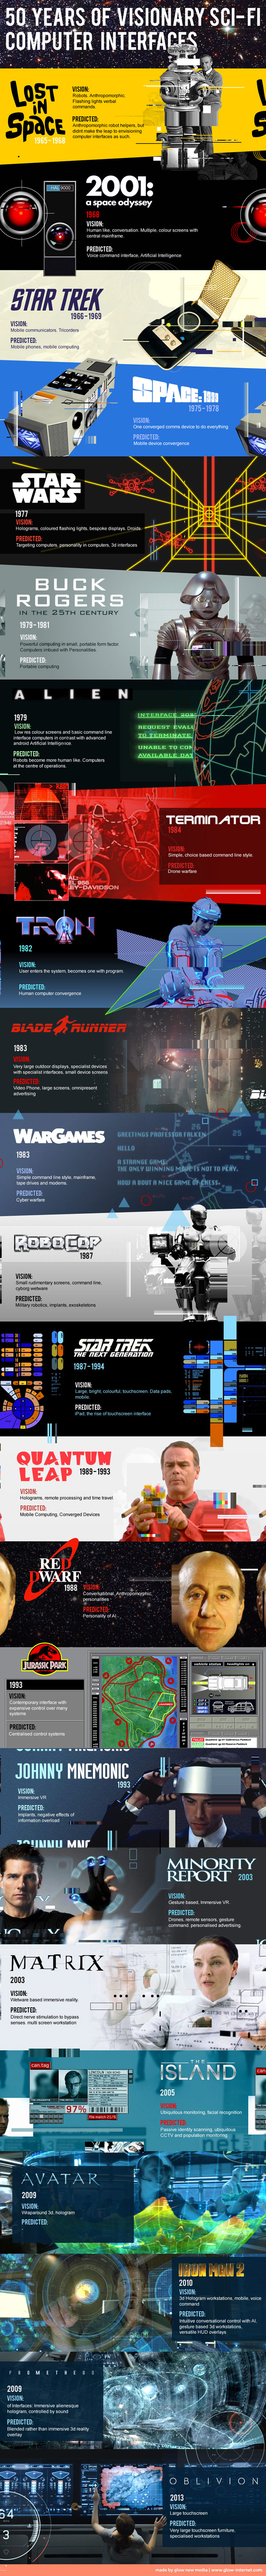 user-sci-fi-interfaces-infographic-2013